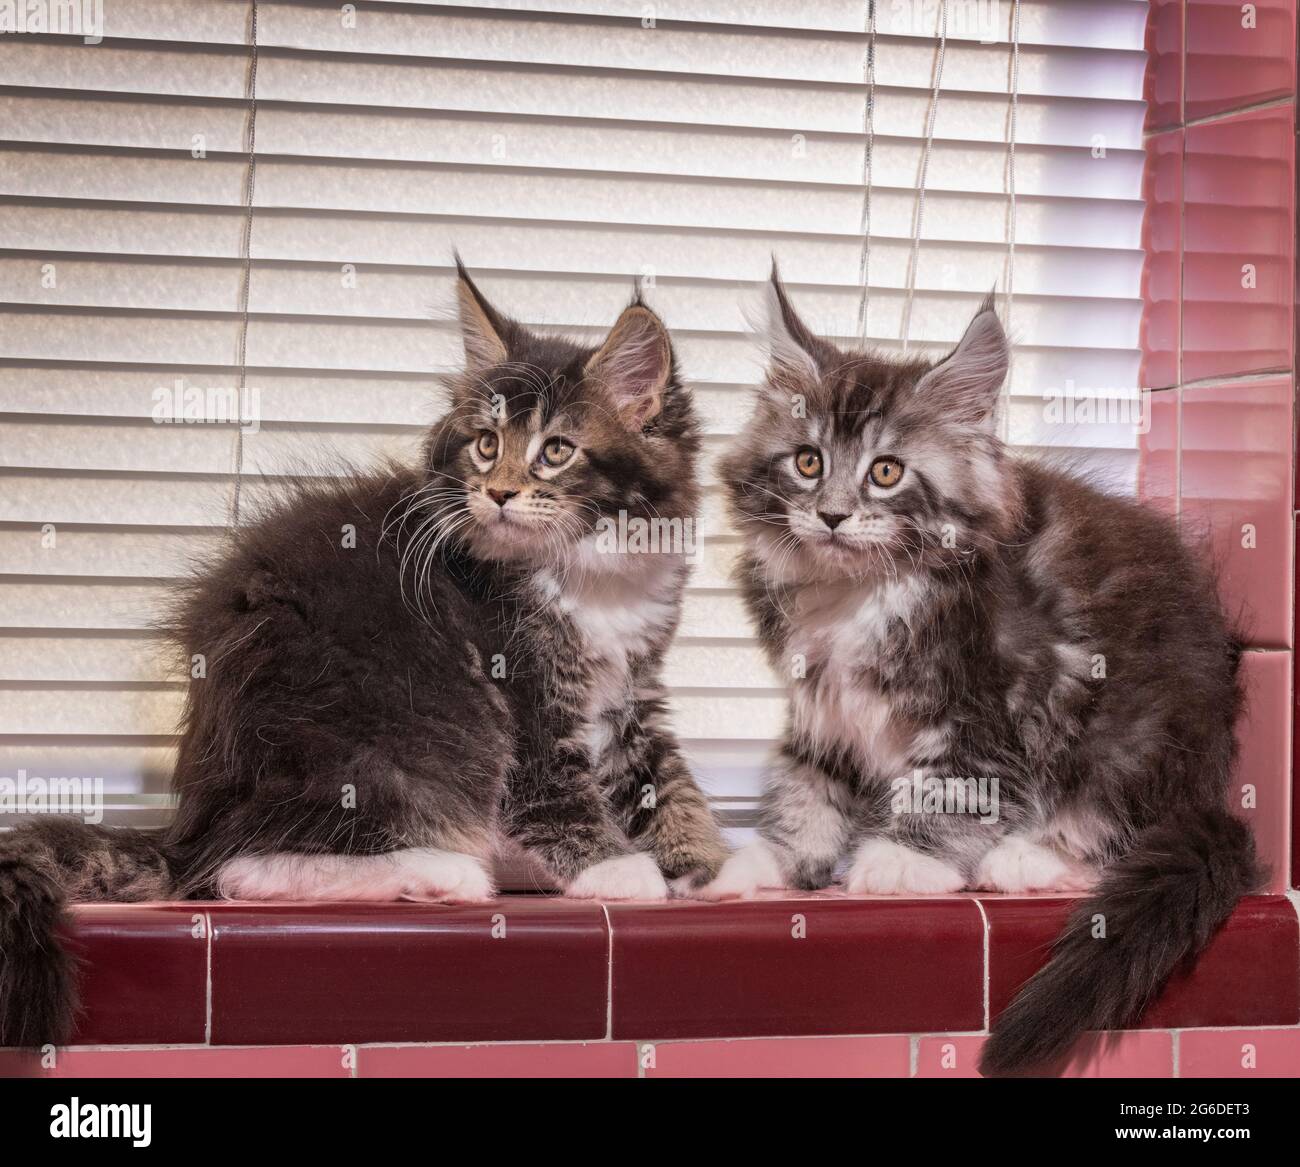 Pair of Maine Coon Cat kittens sit on tile window sill Stock Photo